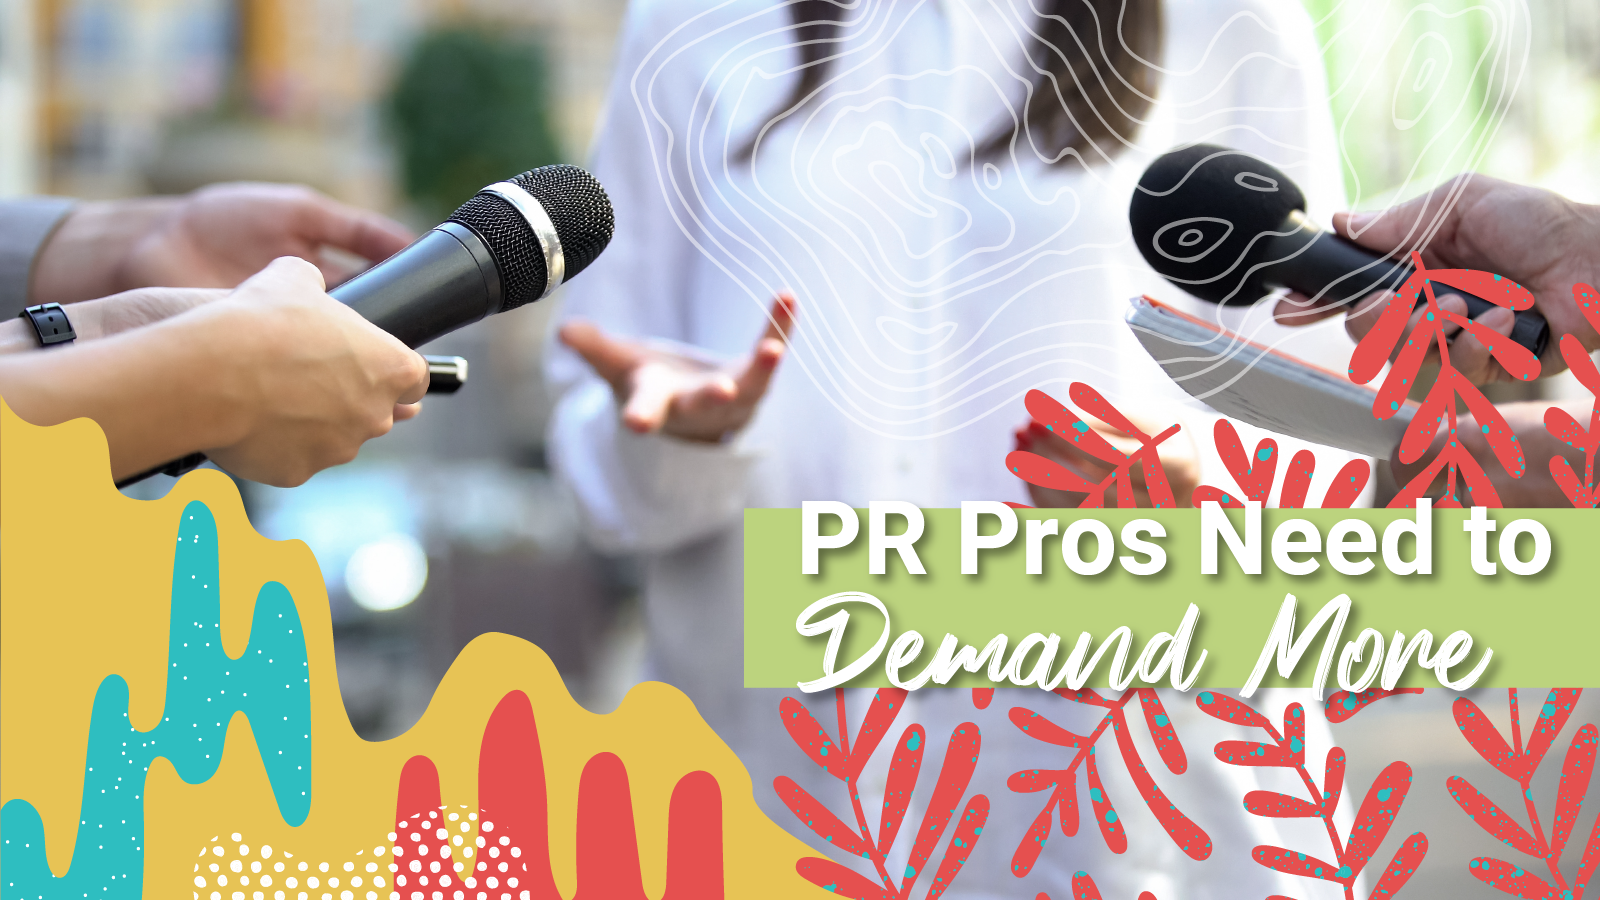 A microphone being held out to an individual for questions and feedback behind the words, "PR Pros Need to Demand More"